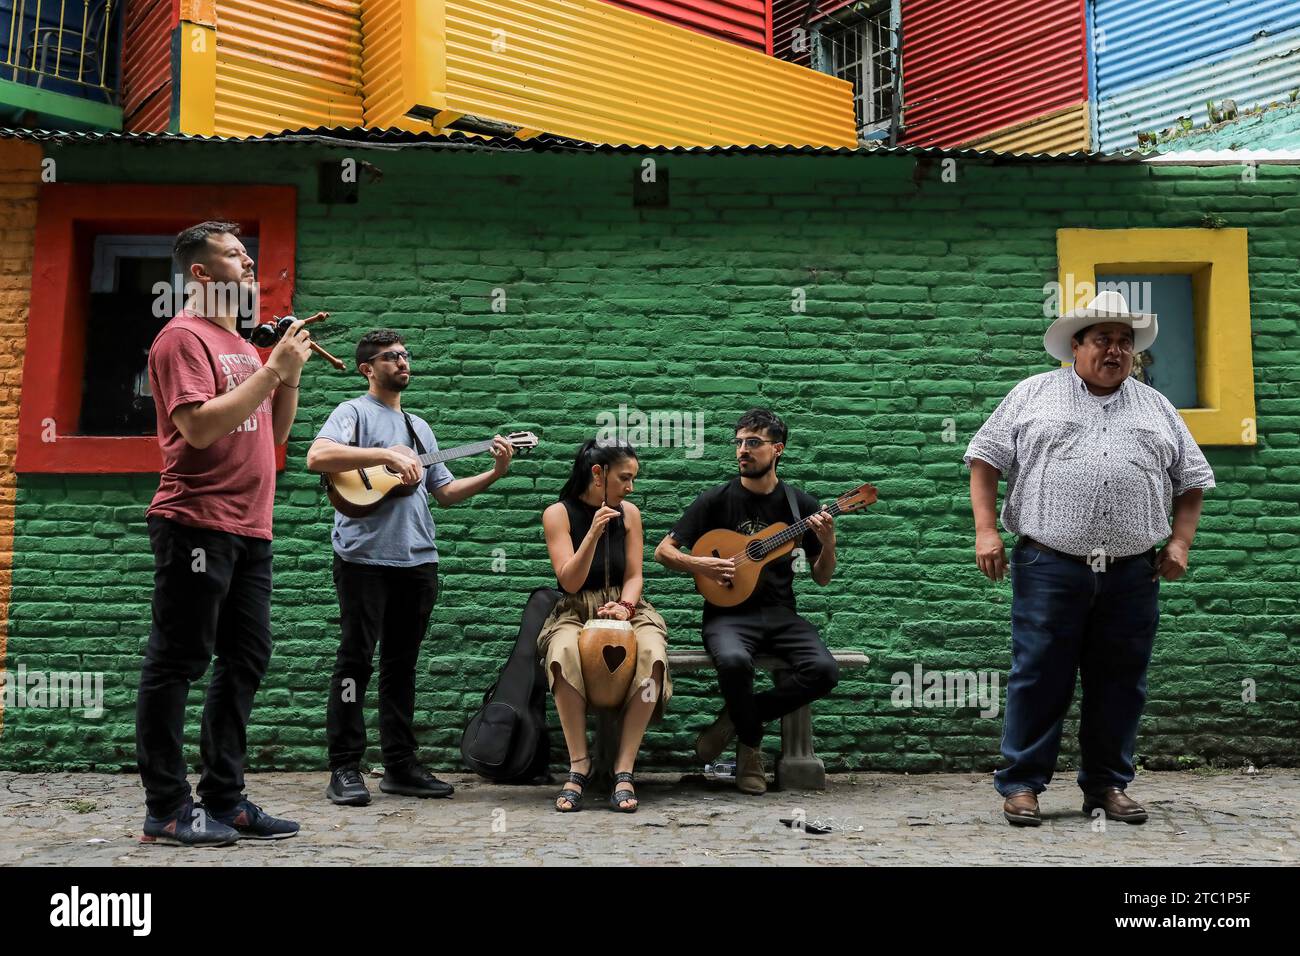 People sing in 'La Boca', before the change of government amid economic and social upheaval. President-elect Javier Milei of La Libertad Avanza, a far-right libertarian who burst onto the Argentine political scene with eccentric and radical proposals, will take office on Sunday, December 10, replacing incumbent Peronist Alberto Fernández. Milei describes himself as an 'anarcho-capitalist' libertarian who wants to drastically reduce the size of the state and replace the local peso with the US dollar. The new administration will face the challenge of reducing the country's 140% annual inflation Stock Photo